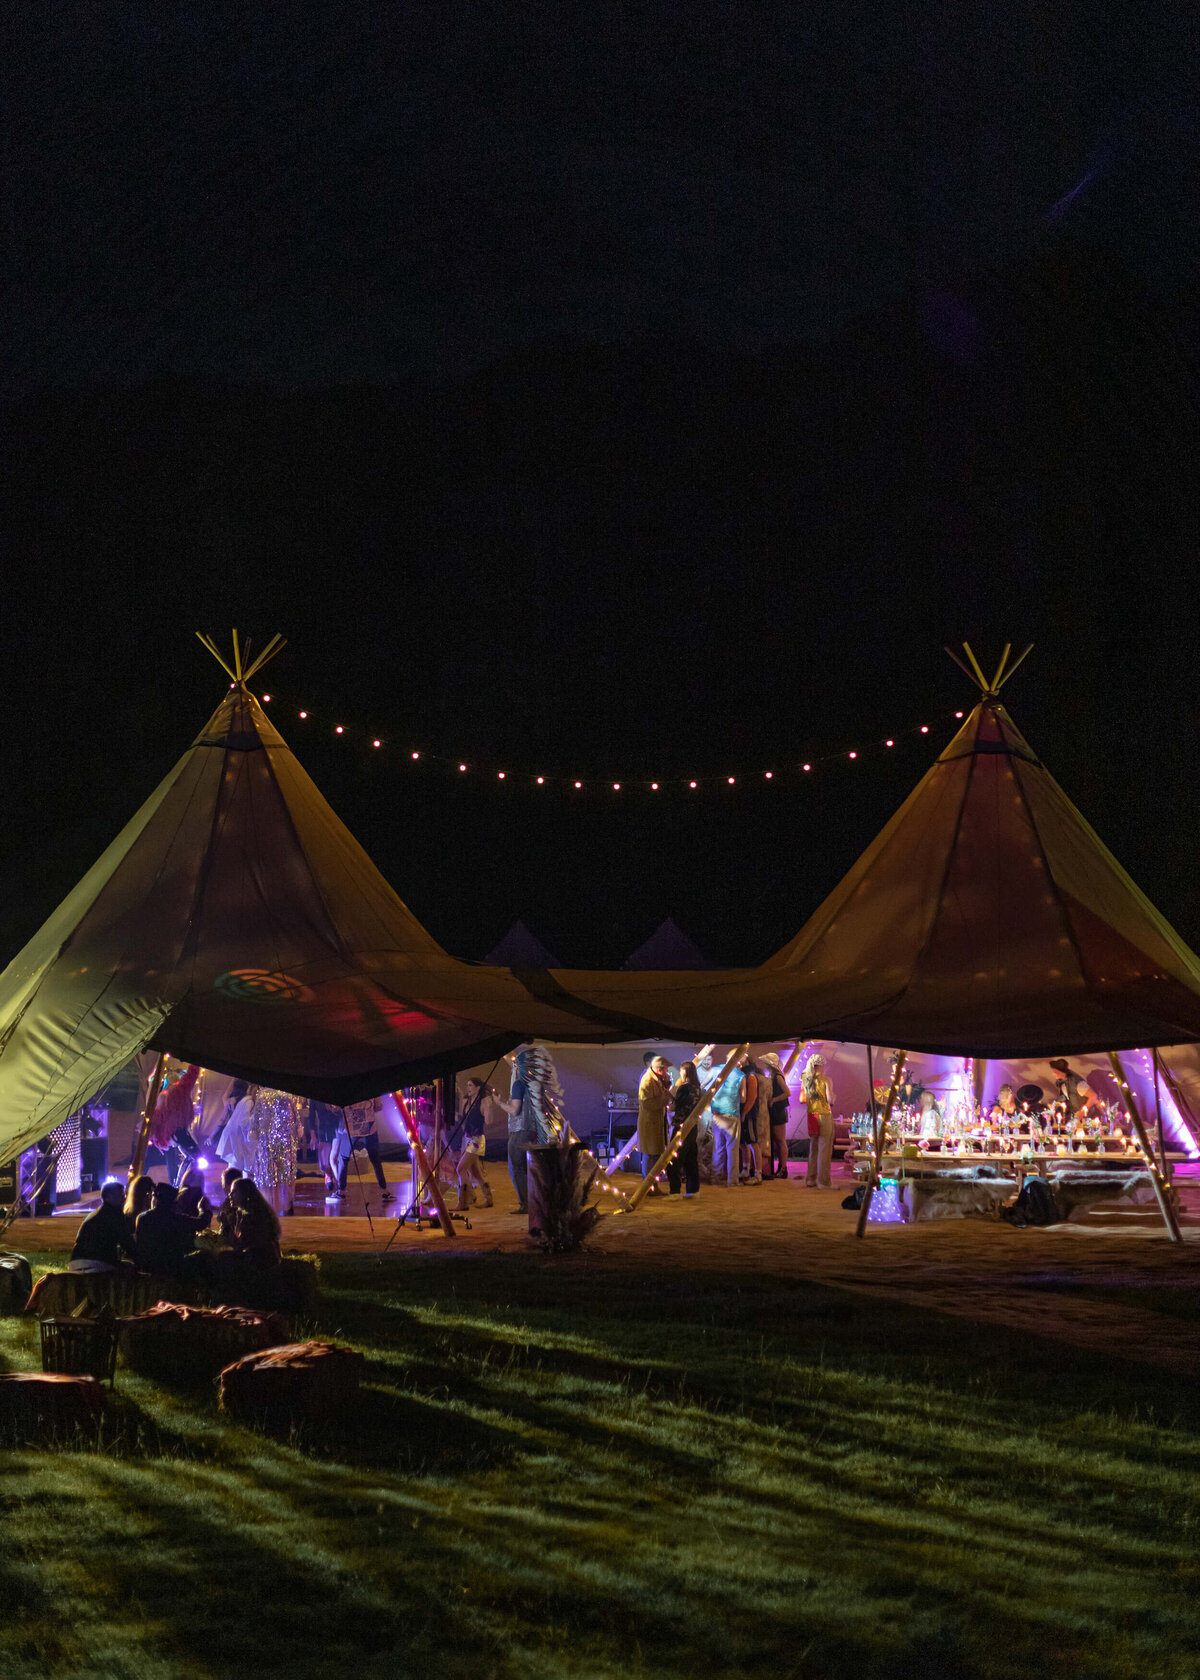 events-birthday-party-gsp-festival-tipi-stretch-tent-night-lights